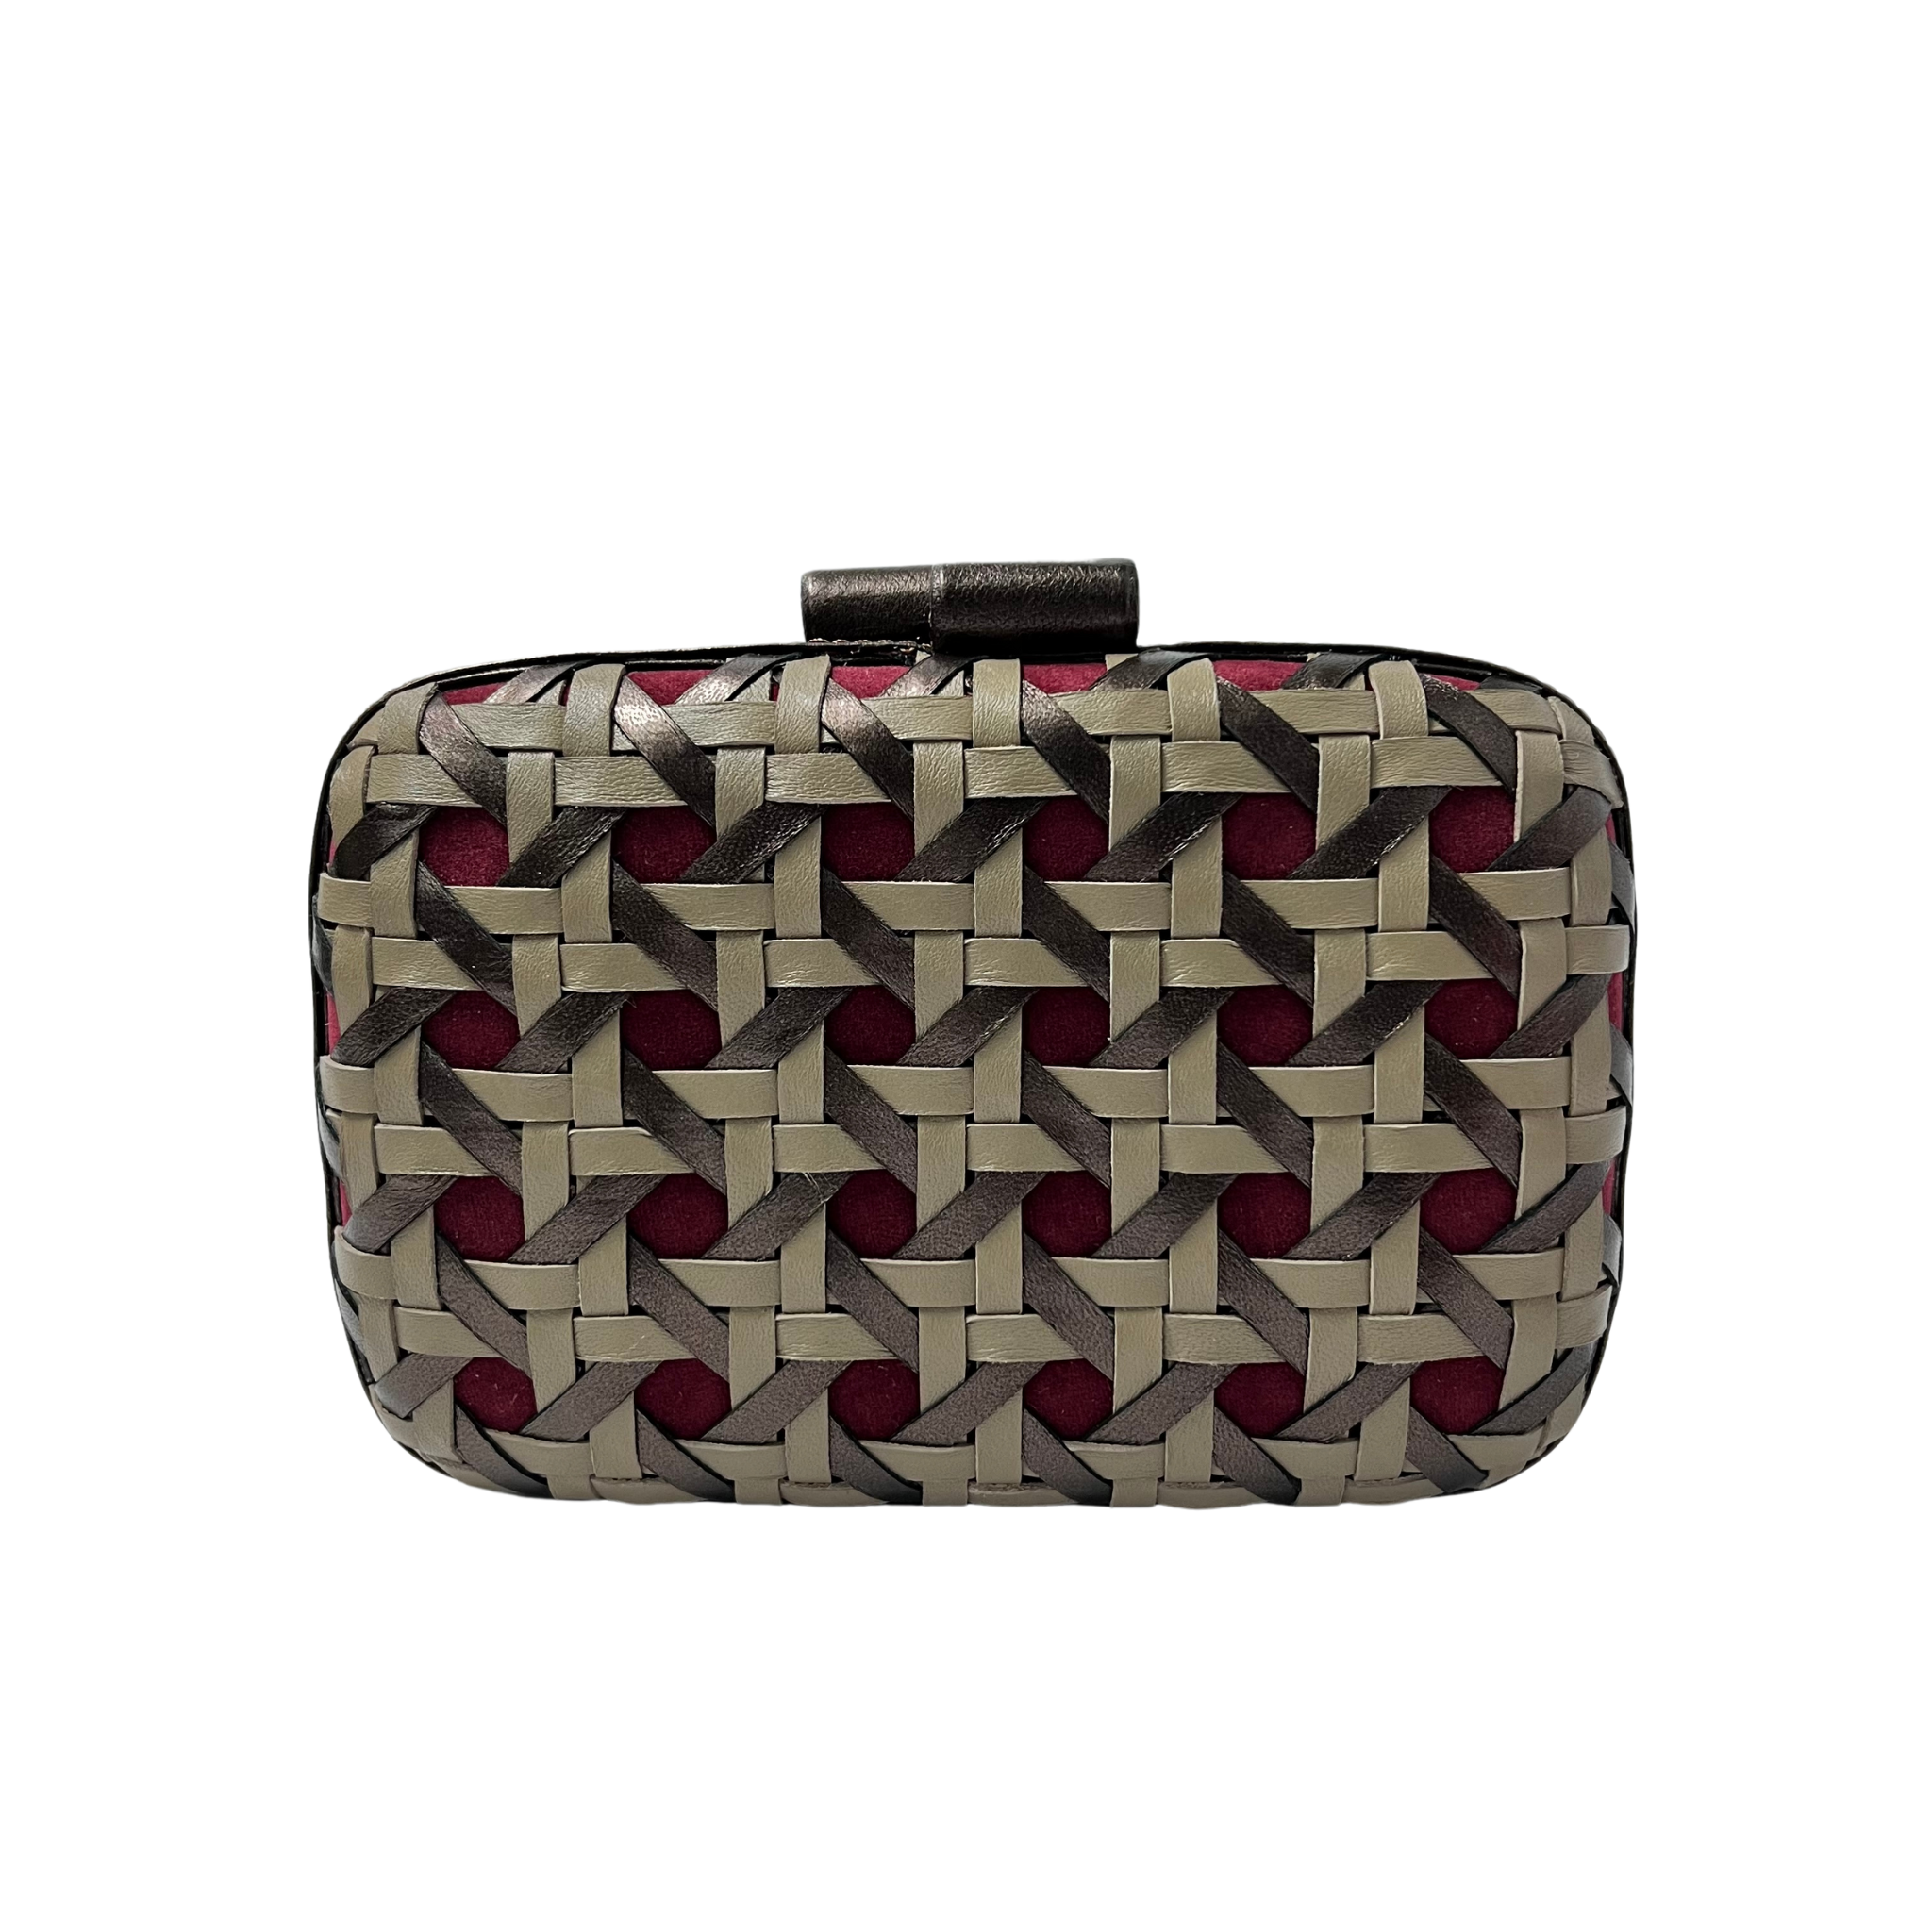 Braided Bag by Gustoko, Sheep skin leather, Braided leather series, Hand crafted, Designed in Lisbon, Espace Cannelle